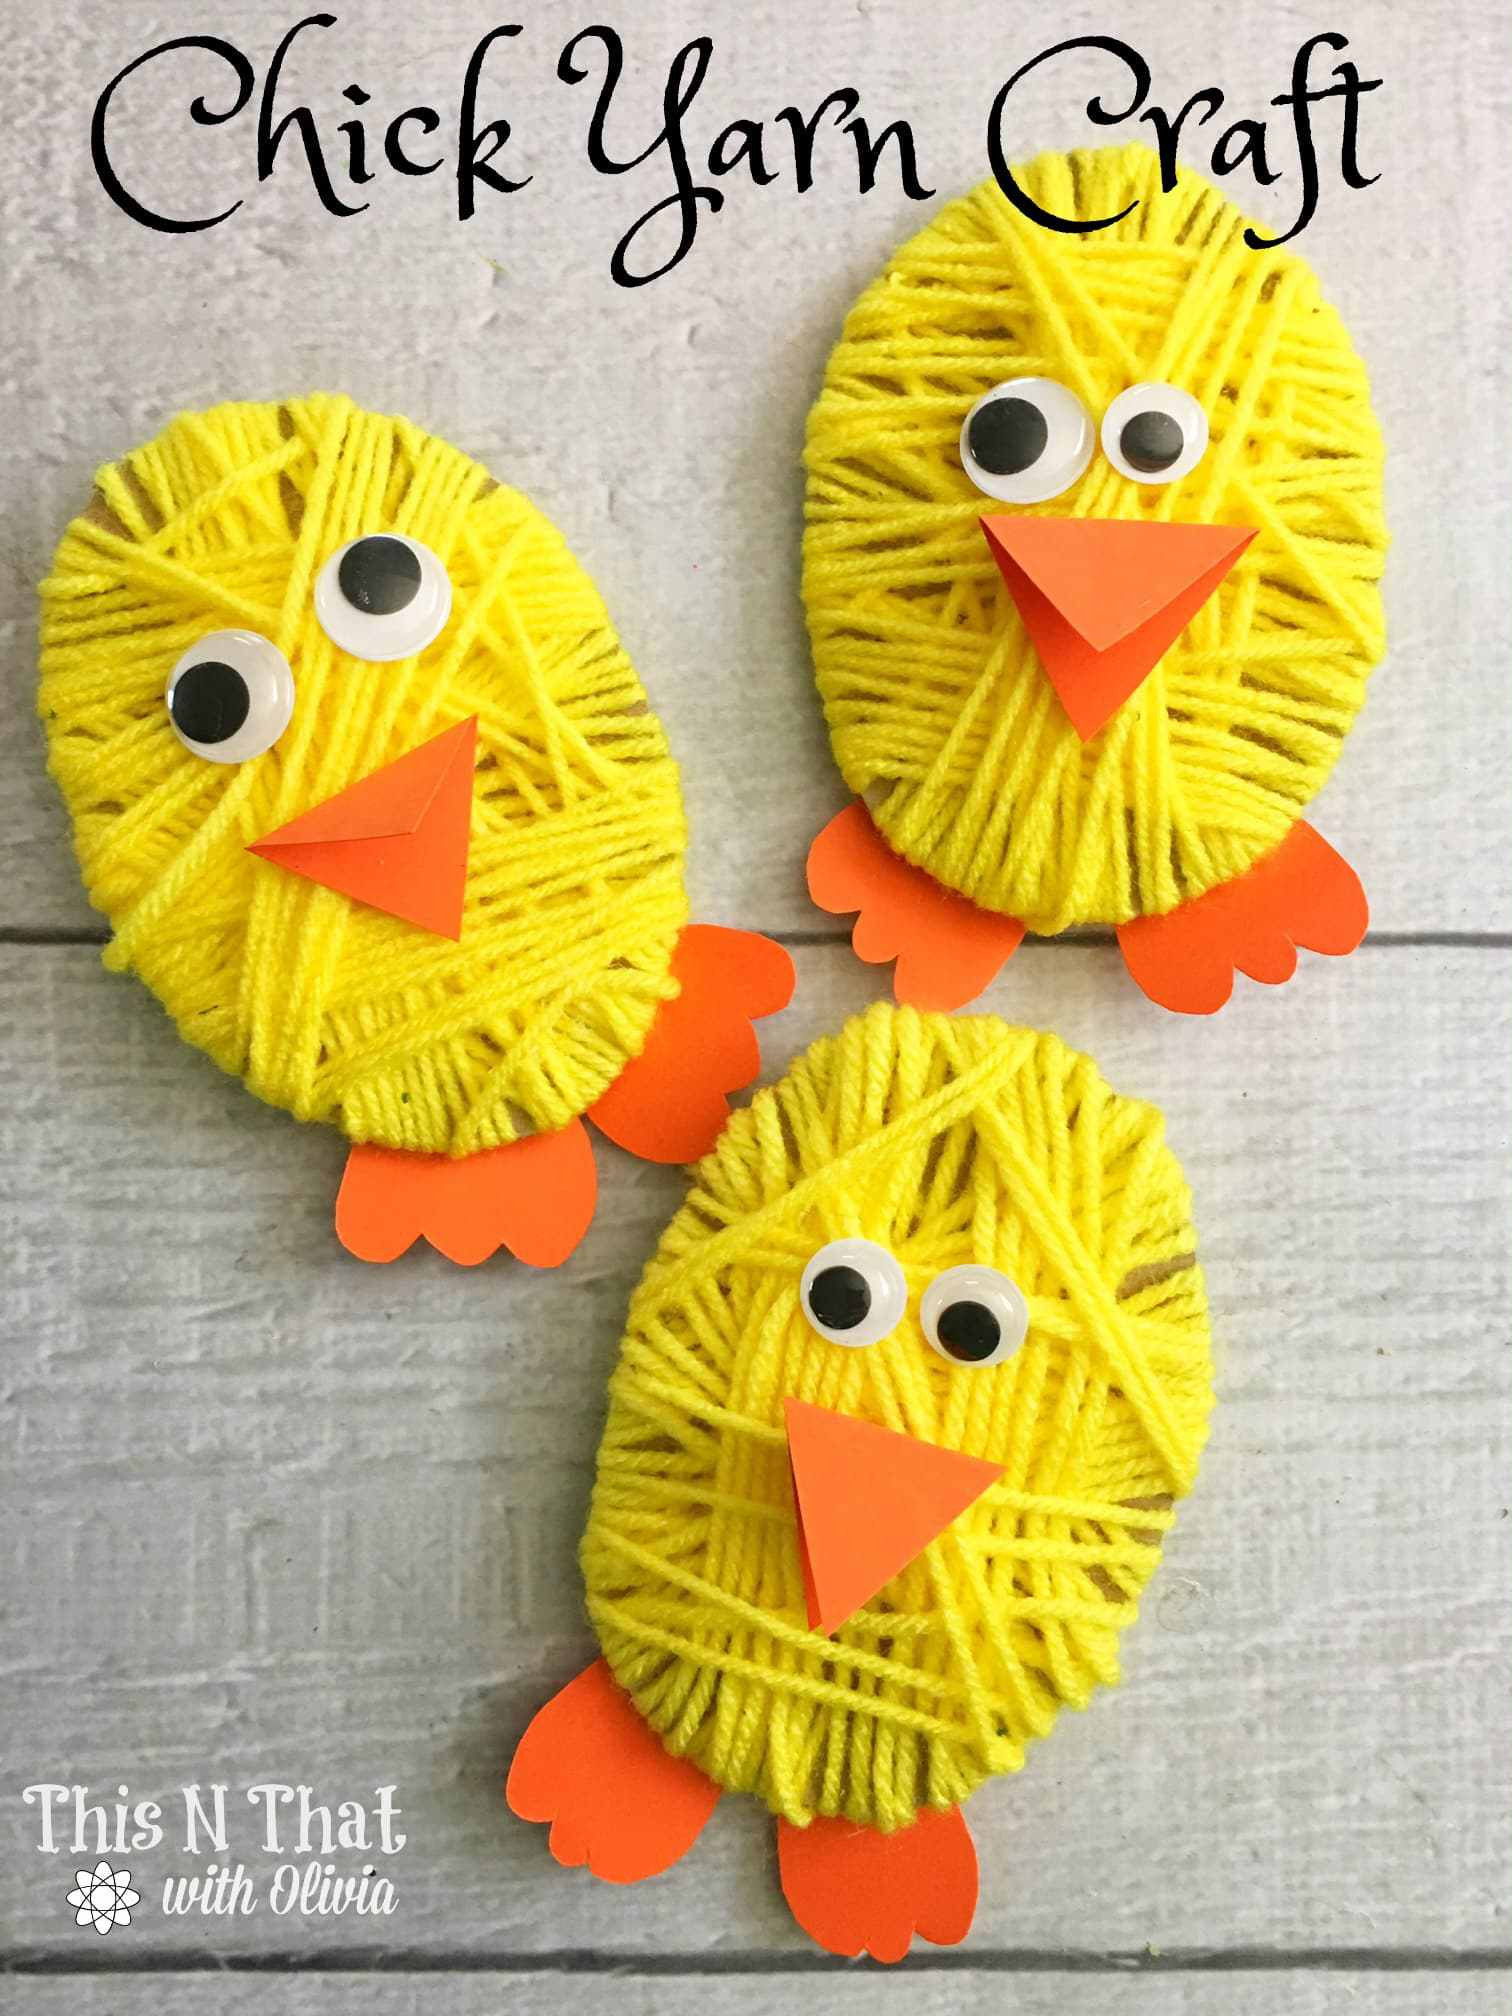 Craft Activities For Preschoolers
 Over 33 Easter Craft Ideas for Kids to Make Simple Cute